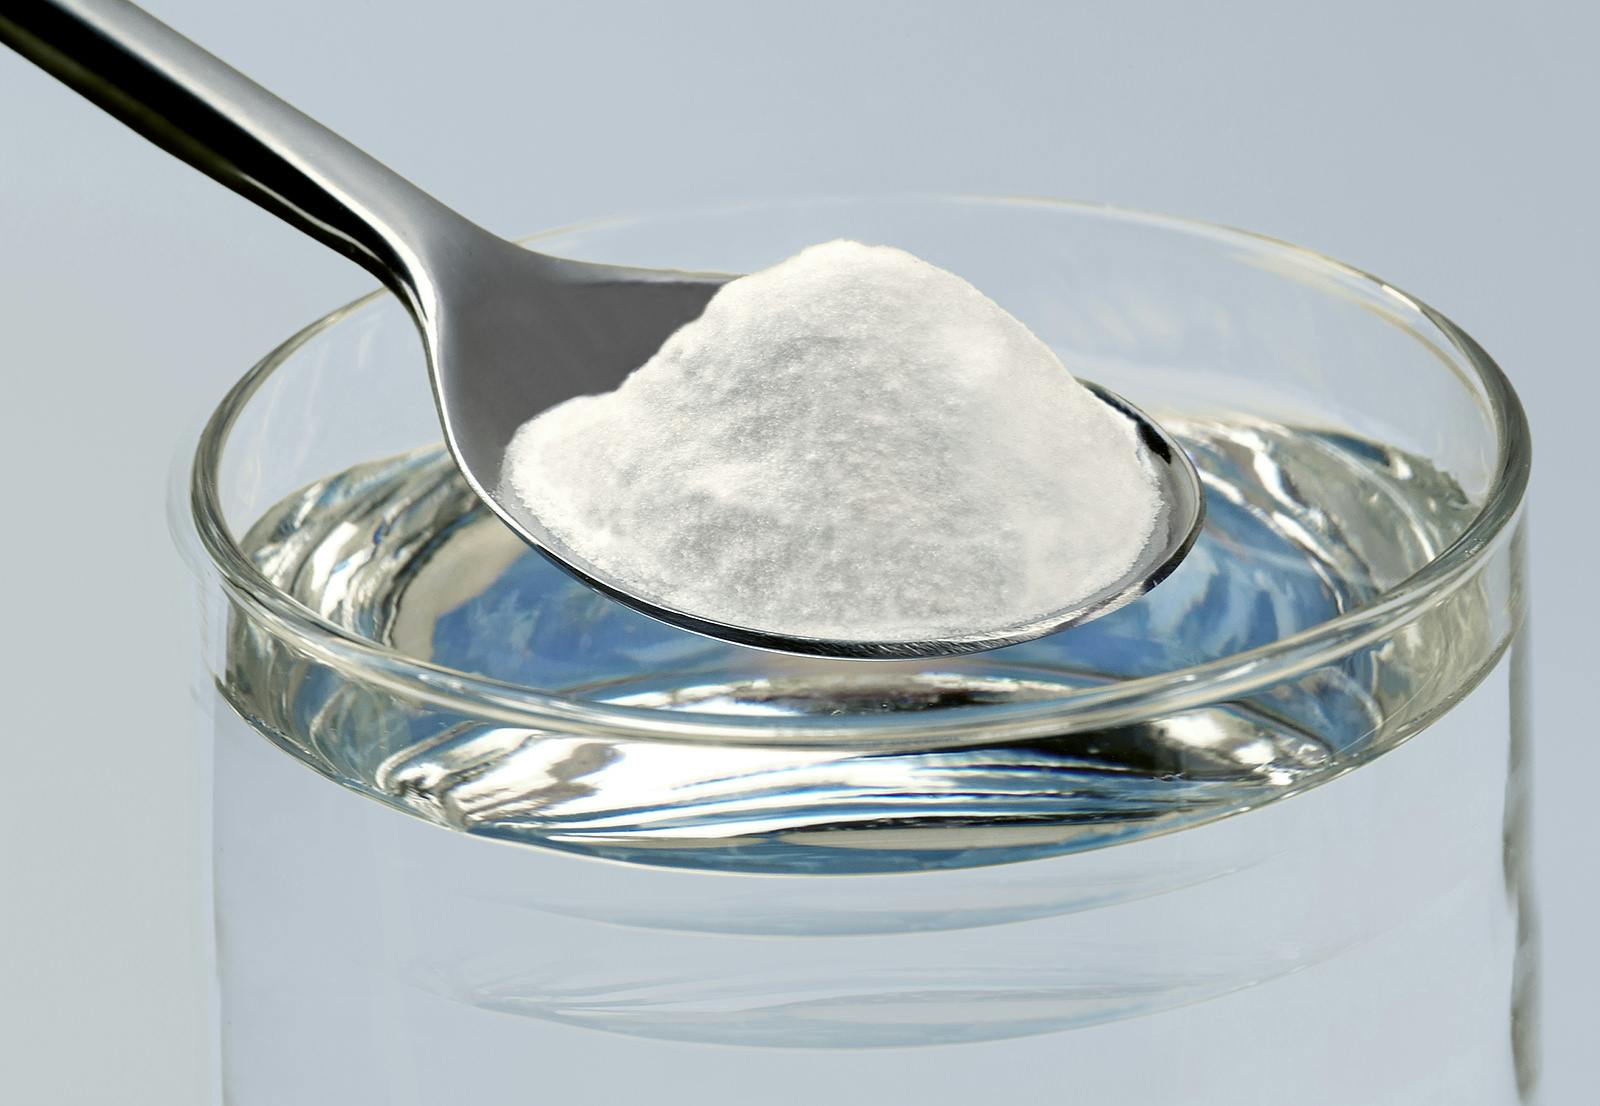 a spoon poised to dissolve baking soda in water